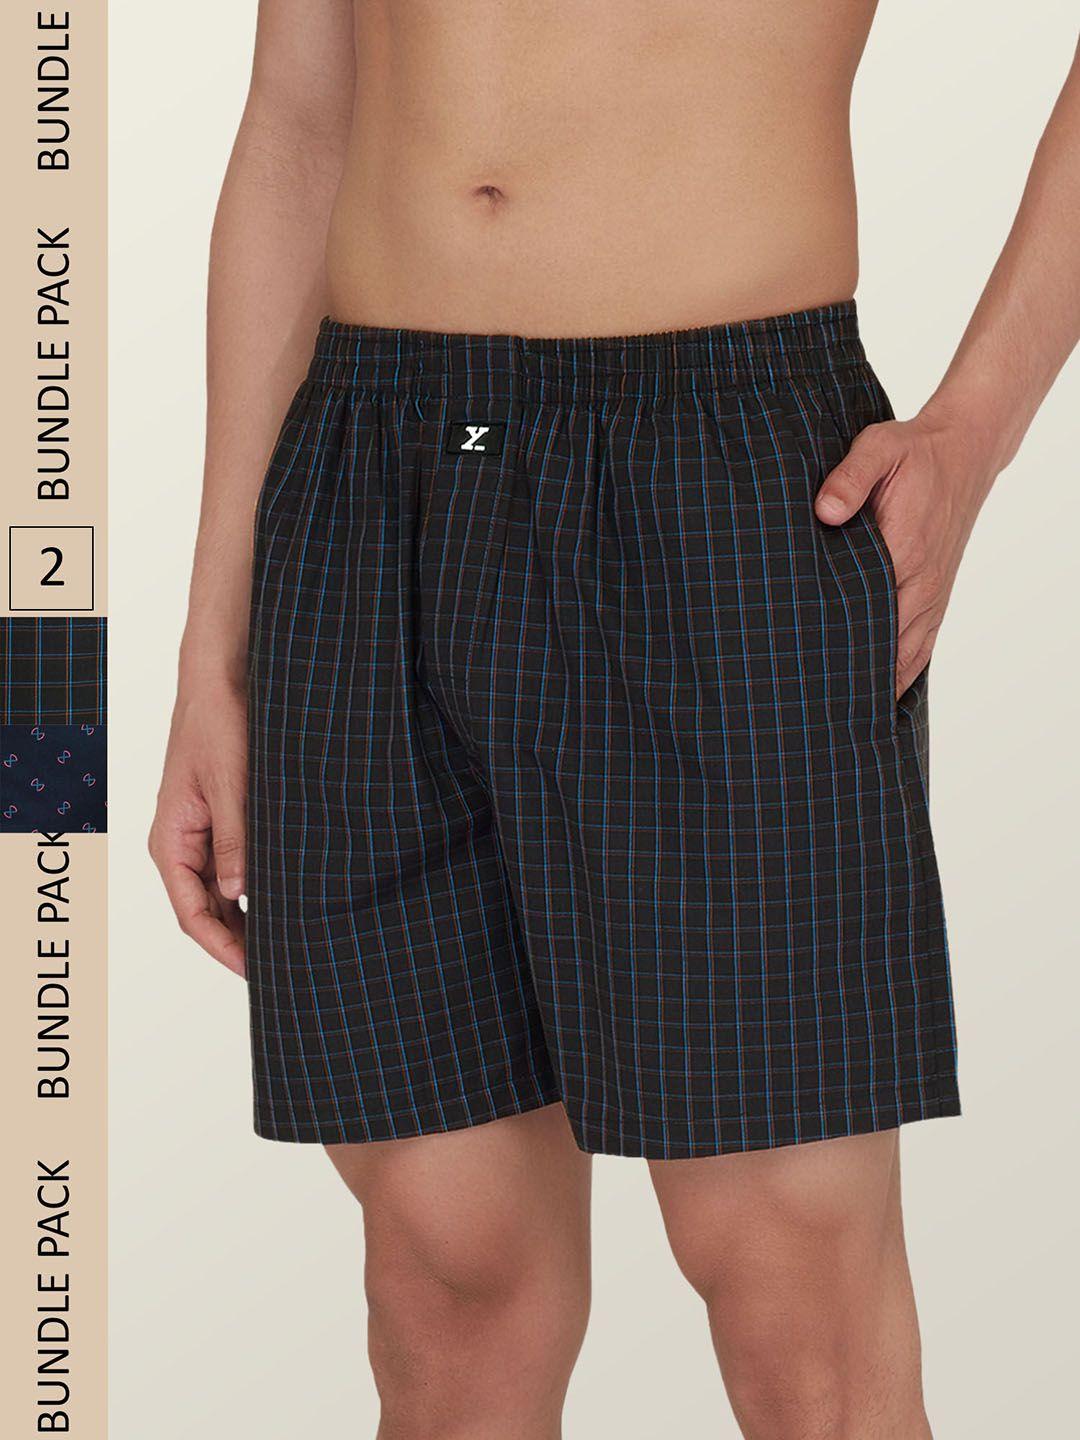 xyxx-men-pack-of-2-printed-cotton-boxers